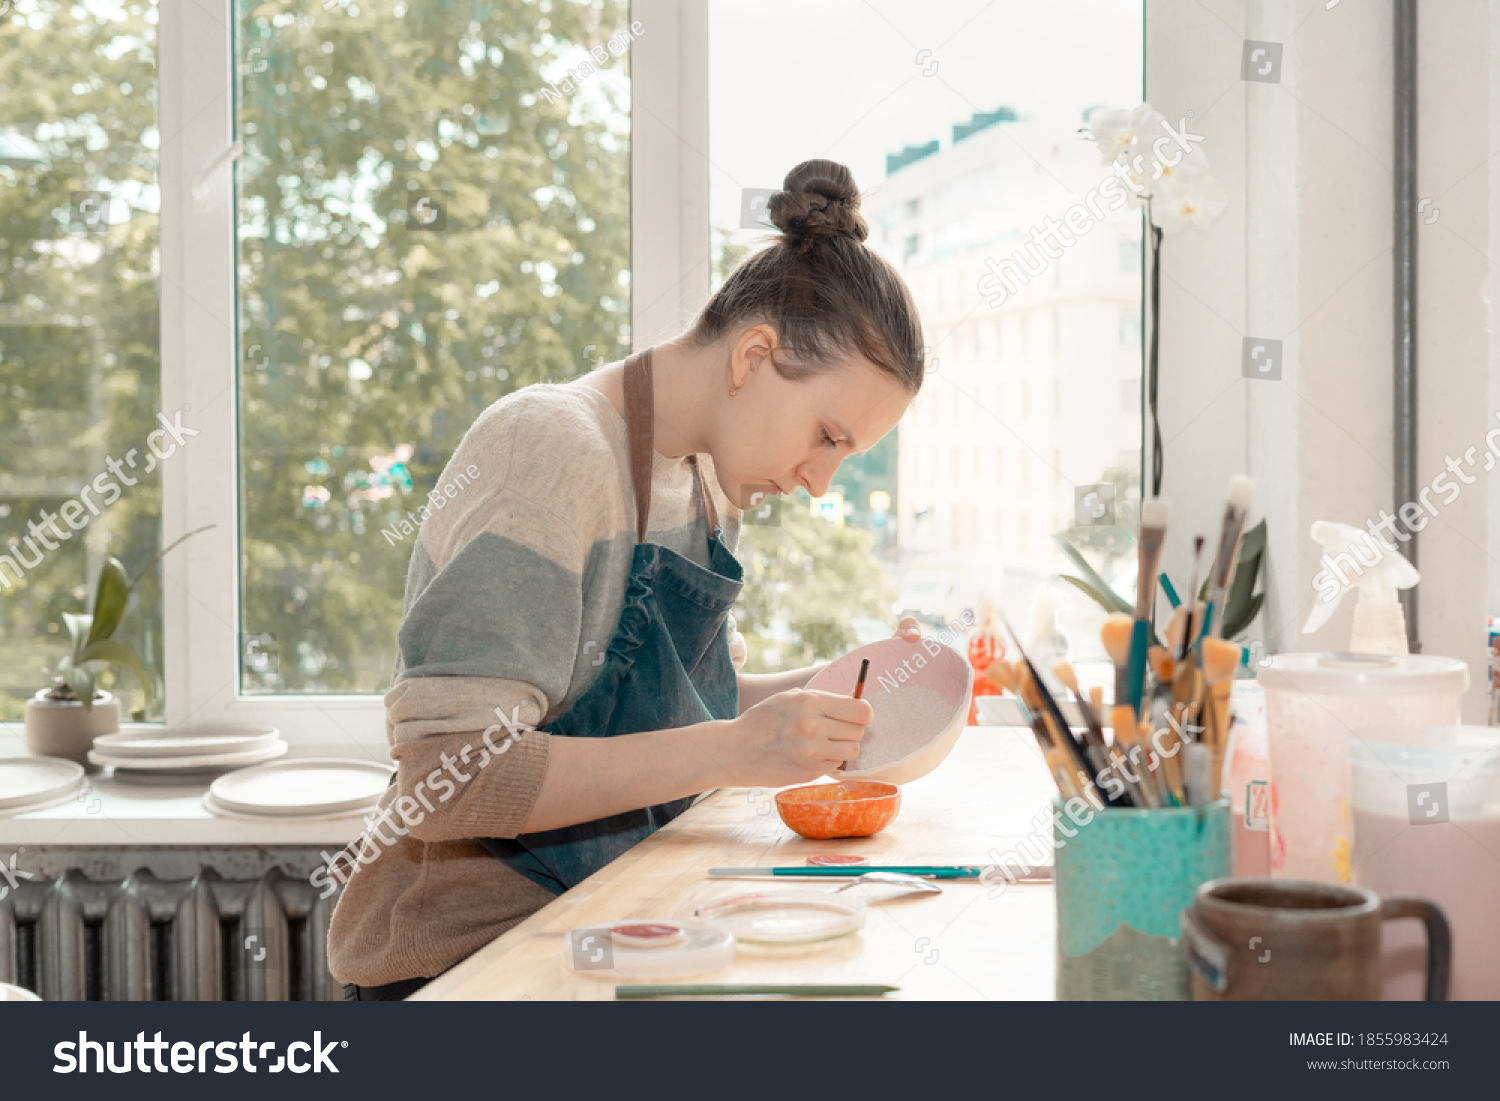 Skilled young woman in apron sitting at table and drawing on ceramic bowl in pottery workshop. Earn extra money, side hustle, turning hobbies into job. #1855983424